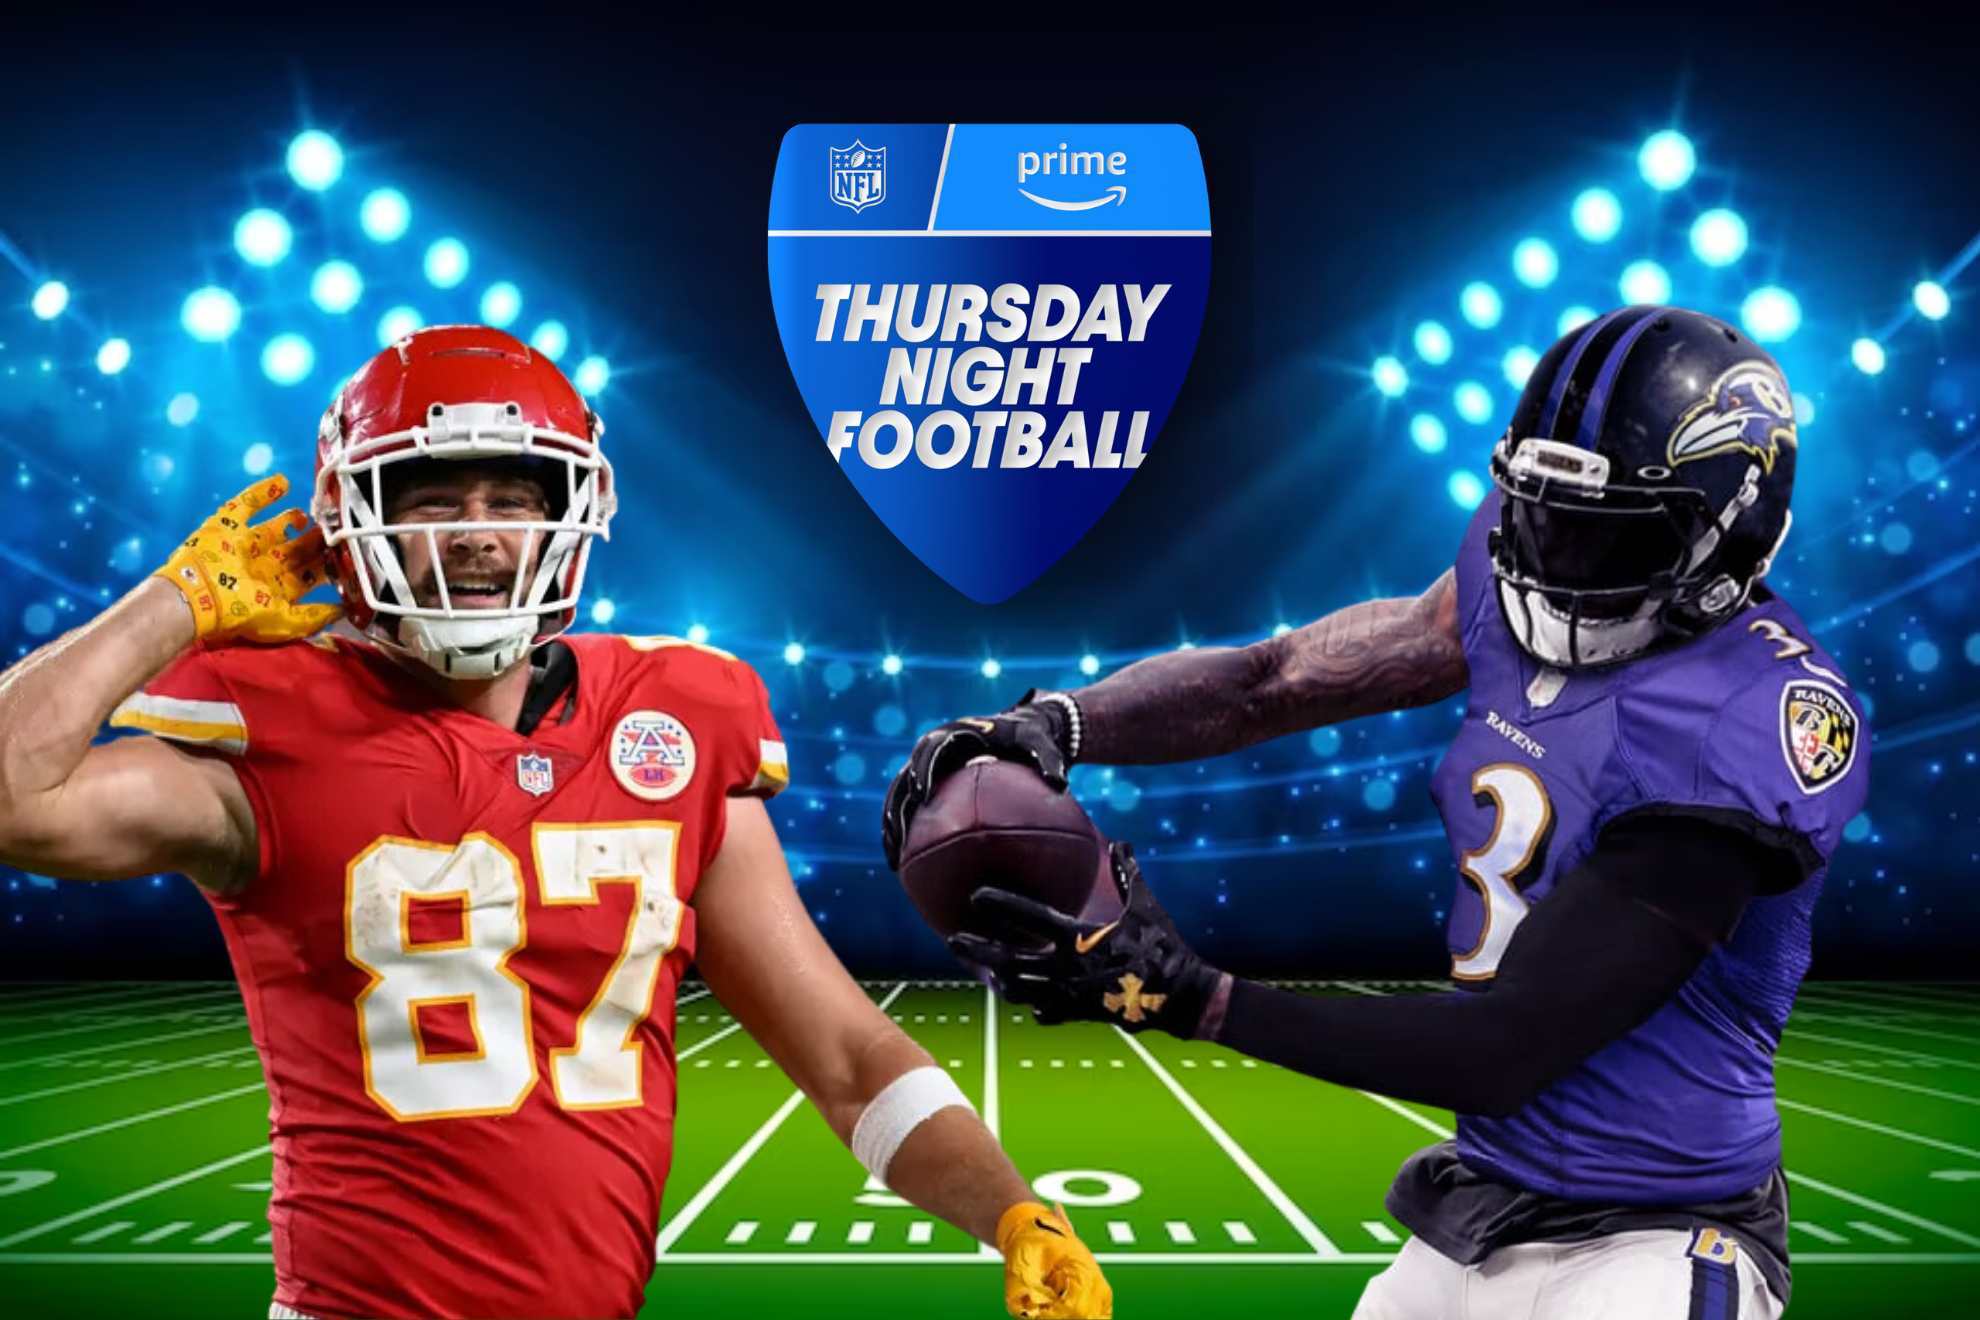 what nfl teams play tonight on thursday night